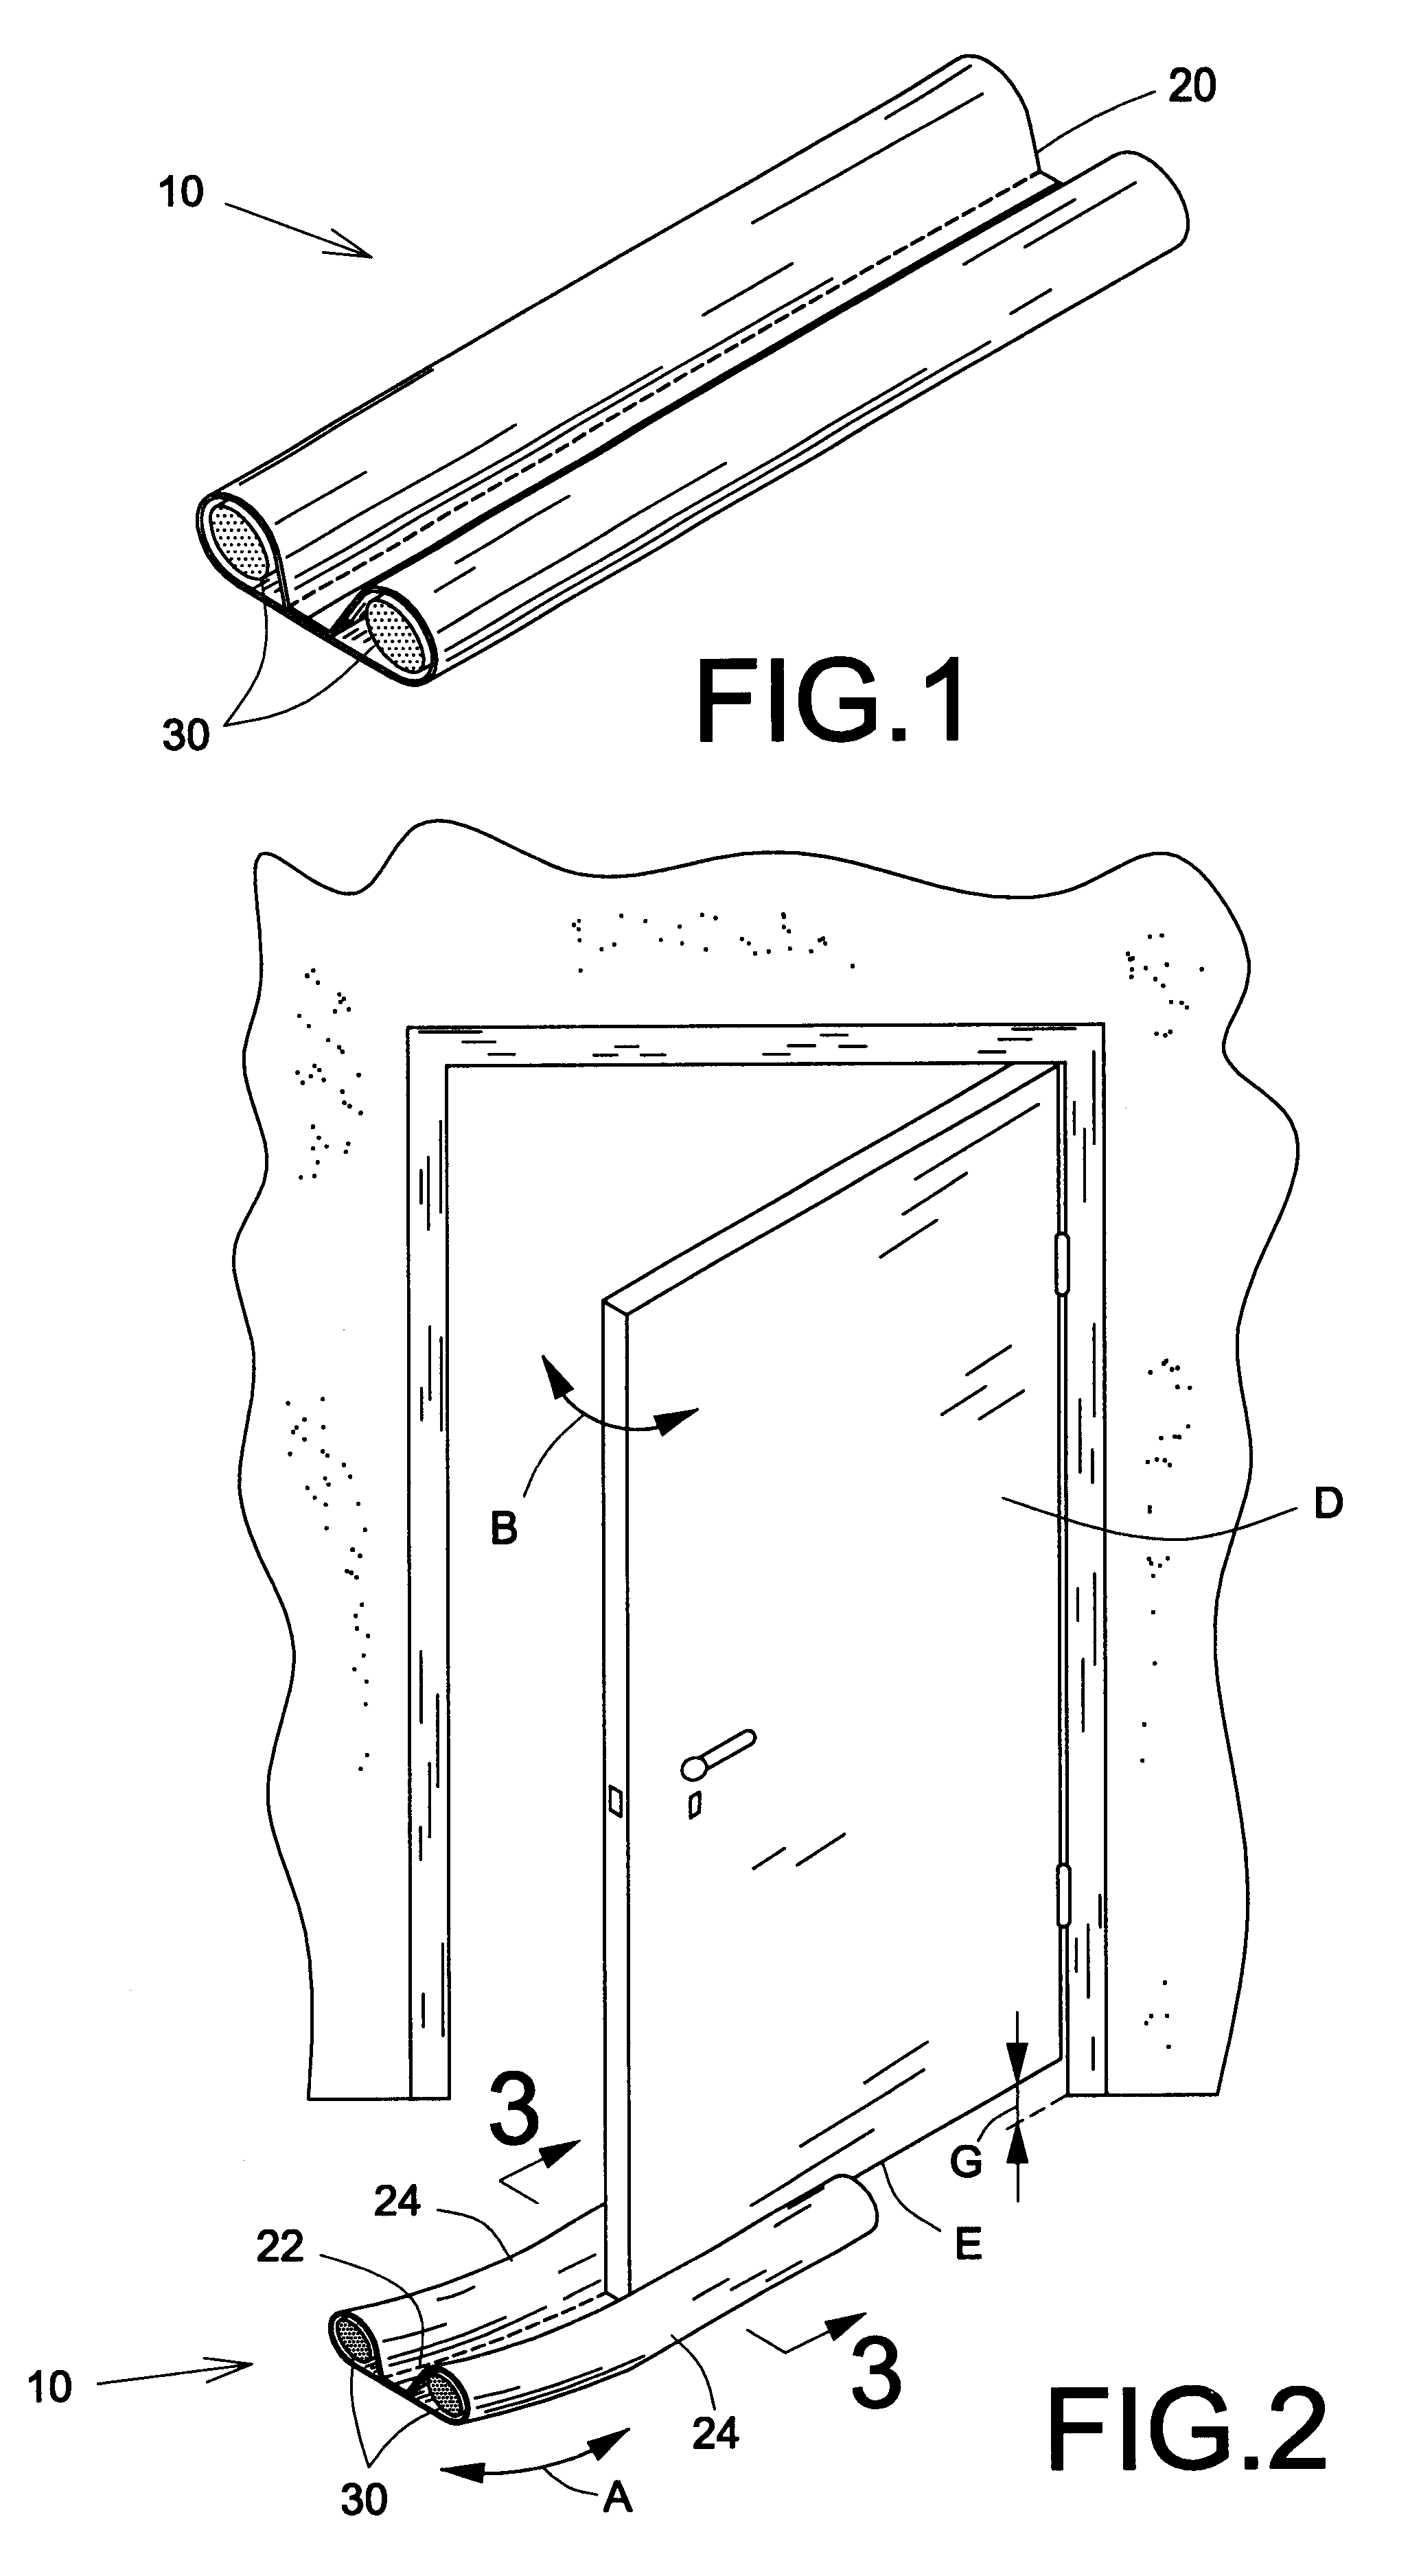 Removable draft excluder having a foldable closing end